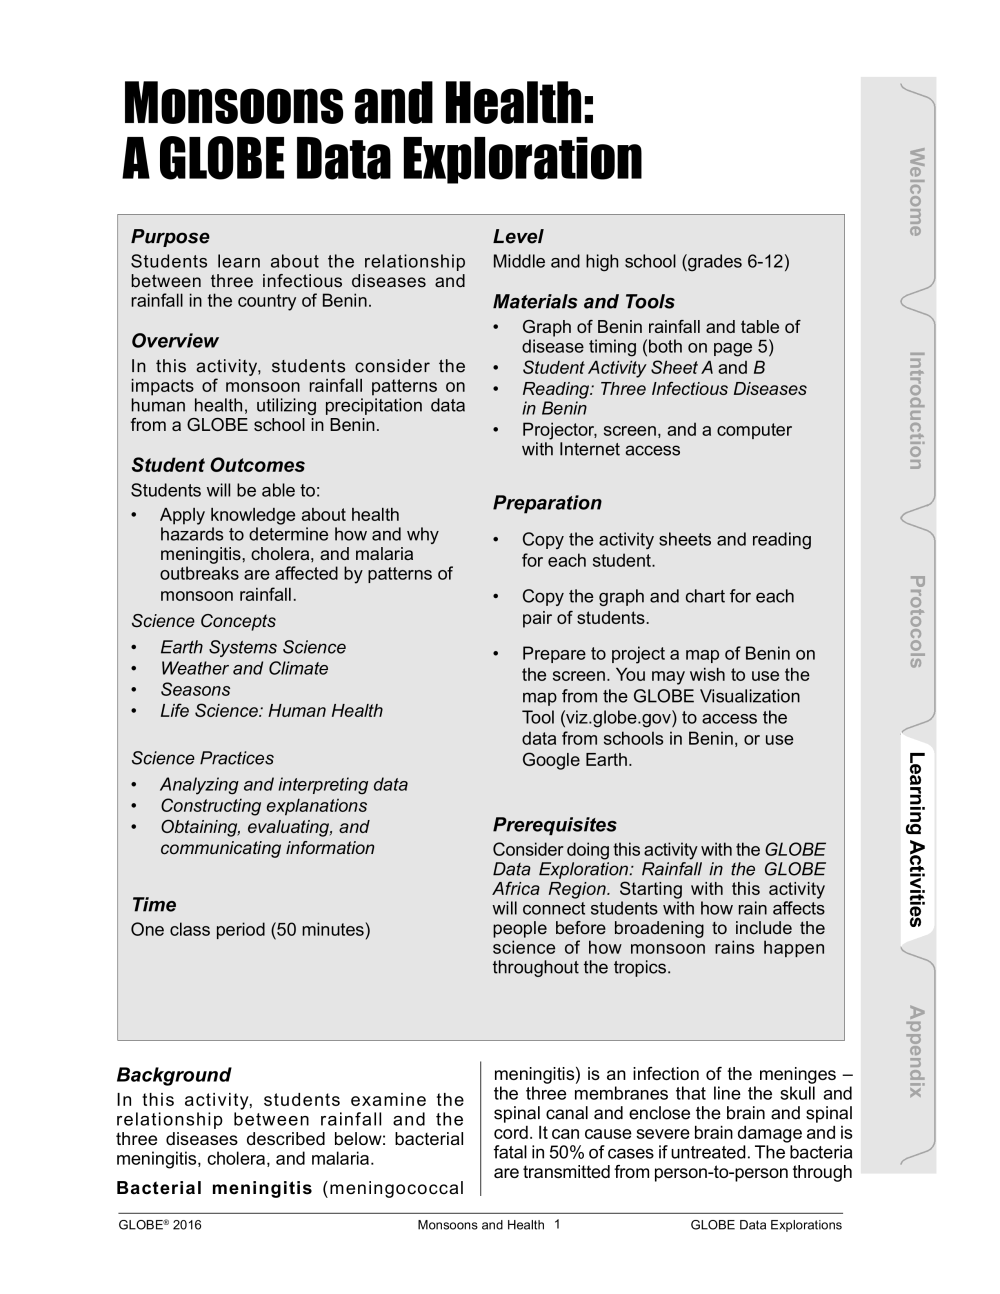 Learning Activities preview for Monsoons and Health- A GLOBE Data Exploration